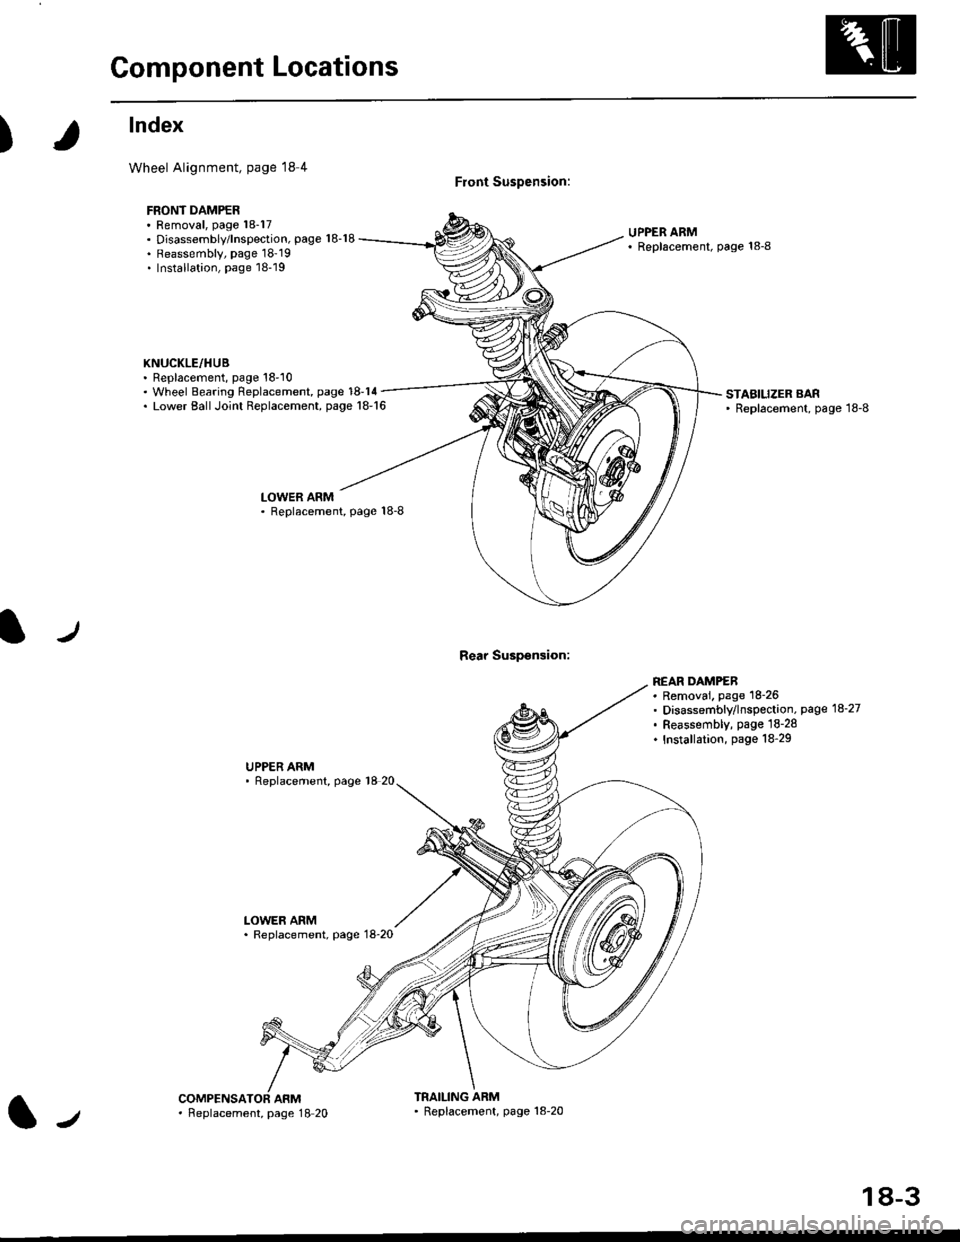 HONDA CIVIC 1998 6.G Workshop Manual Component Locations
)
lndex
Wheel Alignment, page l8 4
FBONT DAMPER. Removal, page 18-17. Disassembly/lnspection, page 18-18. Reassembly, page 1819. Installation, page 18-19
KNUCKLE/HUB. Replacement,